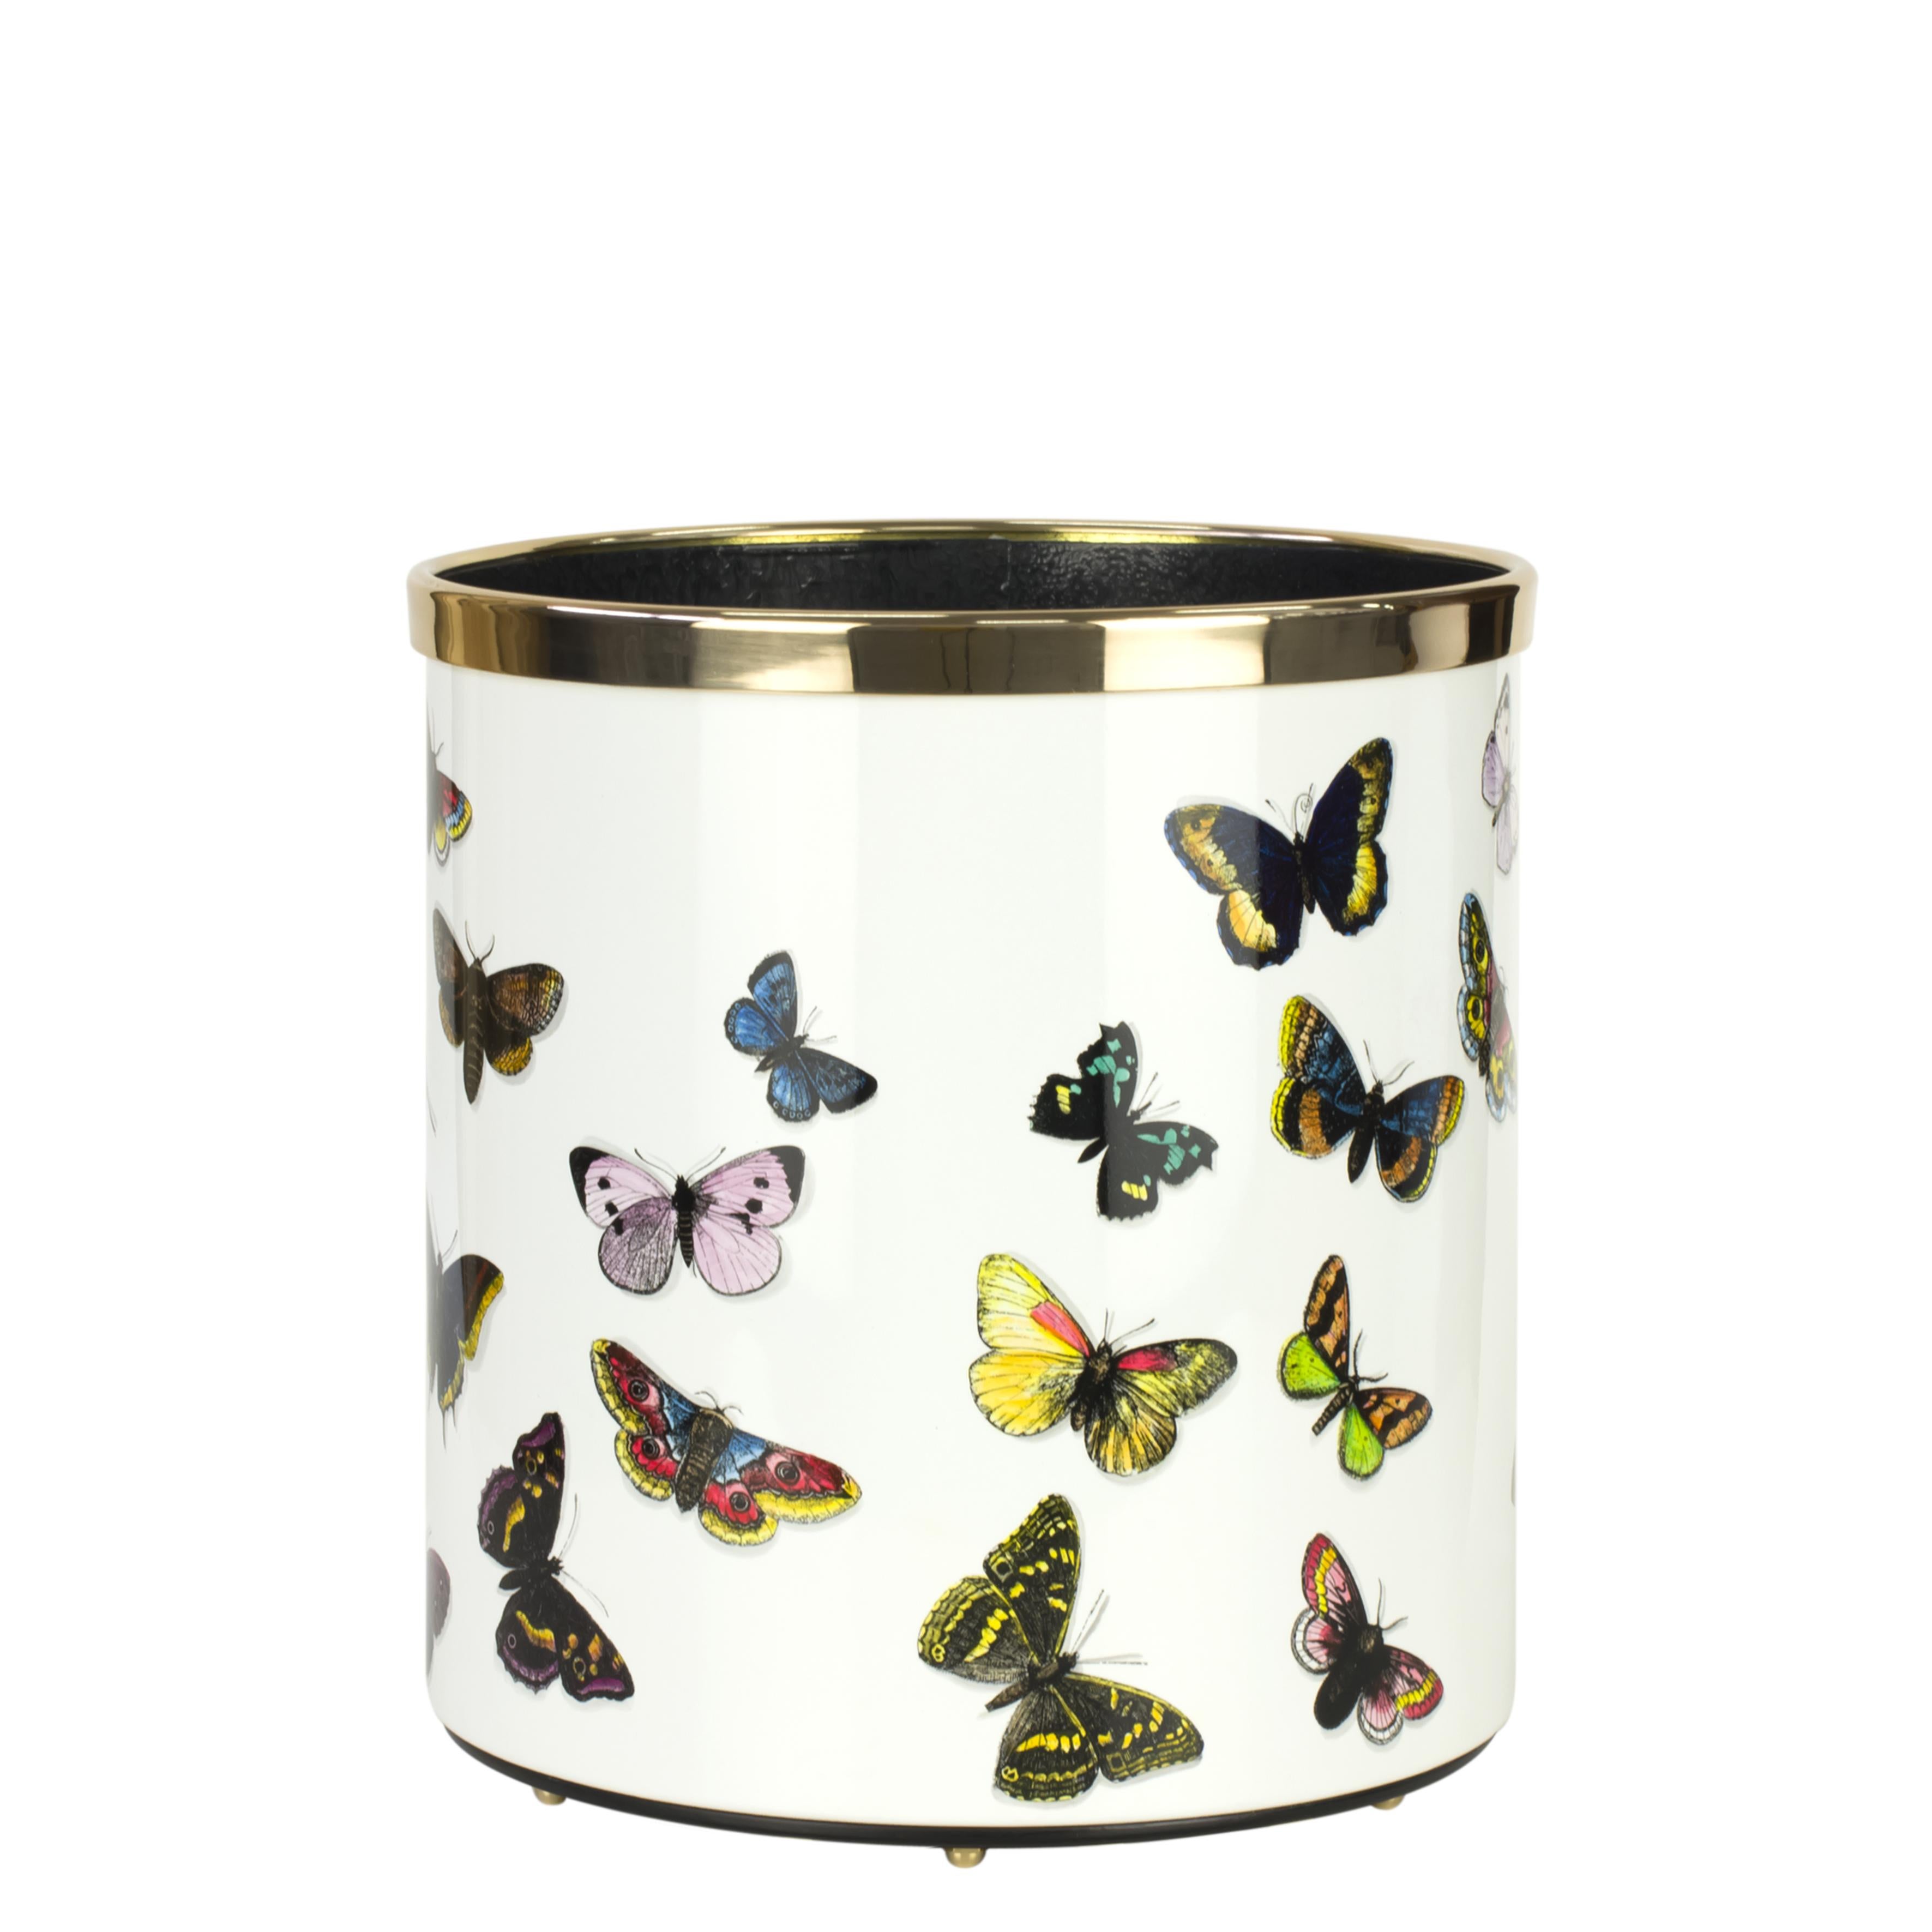 Like all Fornasetti accessories, the paper basket is handcrafted using original artisan techniques. This piece is silk-screened by hand, painted by hand and covered with a smooth lacquer.

The shape is still the same designed by Piero Fornasetti